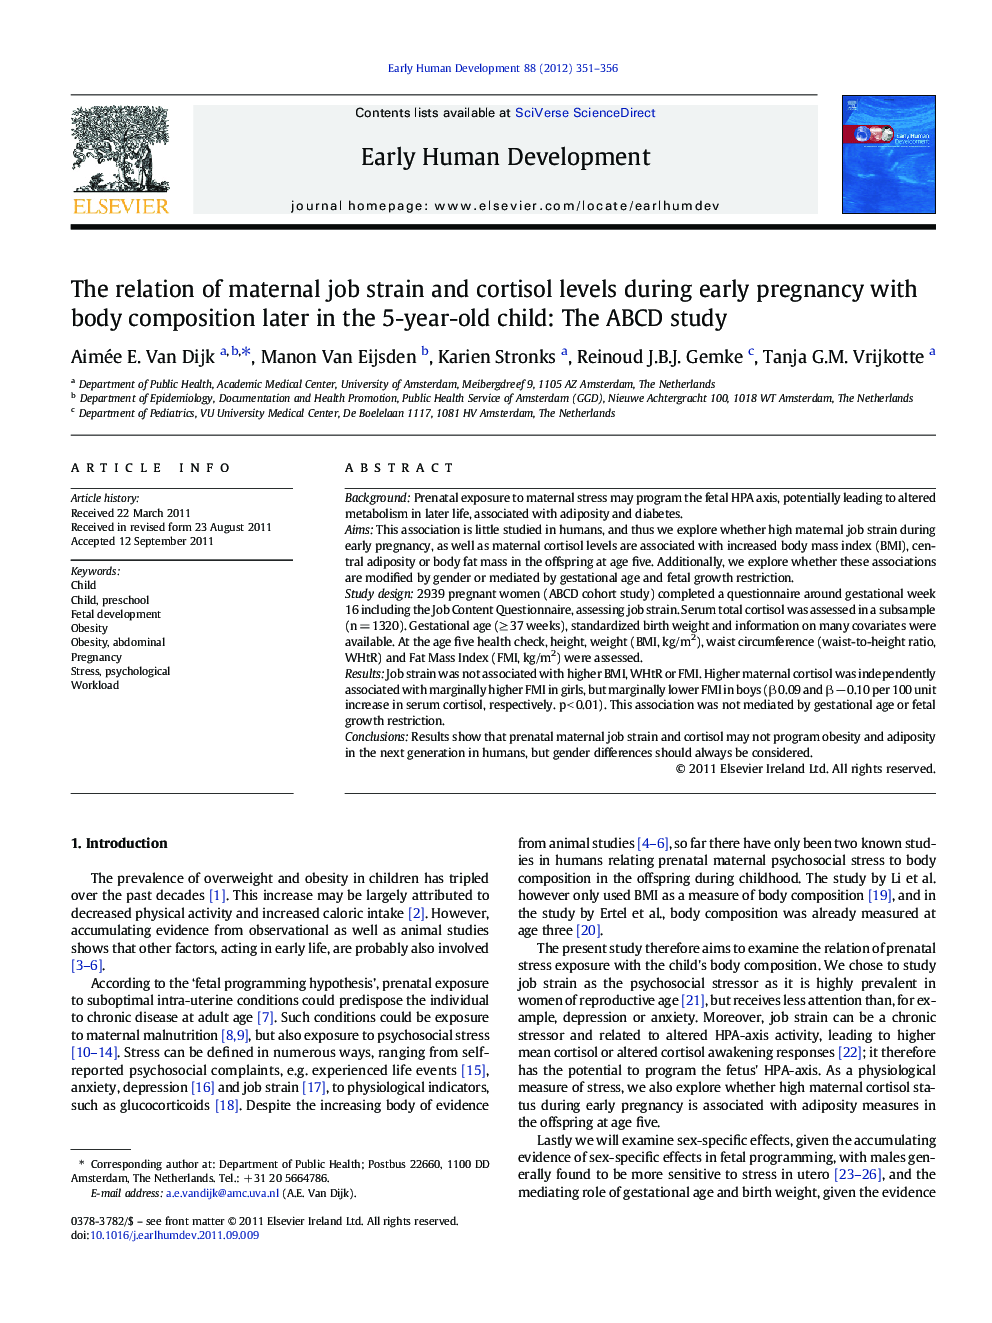 The relation of maternal job strain and cortisol levels during early pregnancy with body composition later in the 5-year-old child: The ABCD study